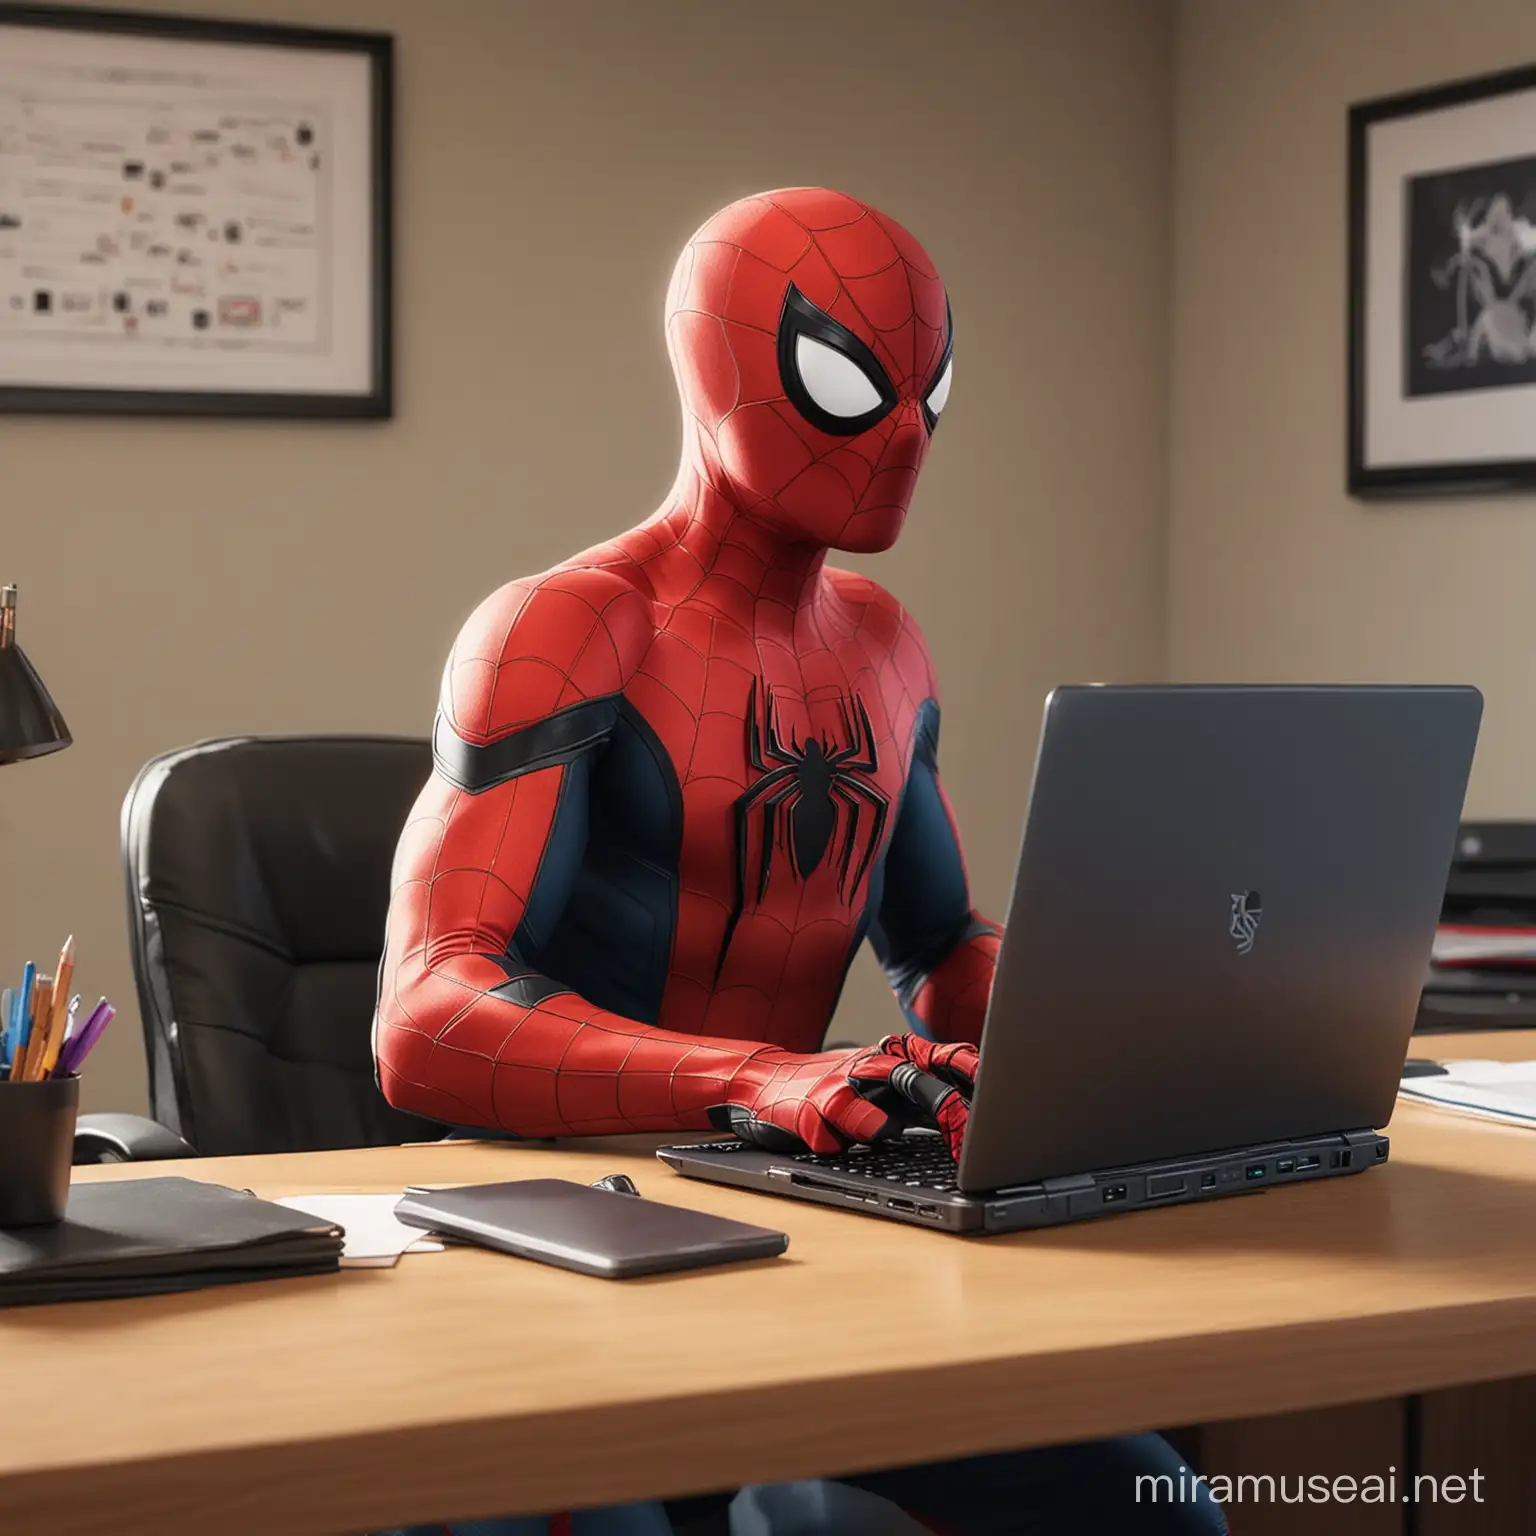 Cartoon SpiderMan Typing on Laptop in Private Room